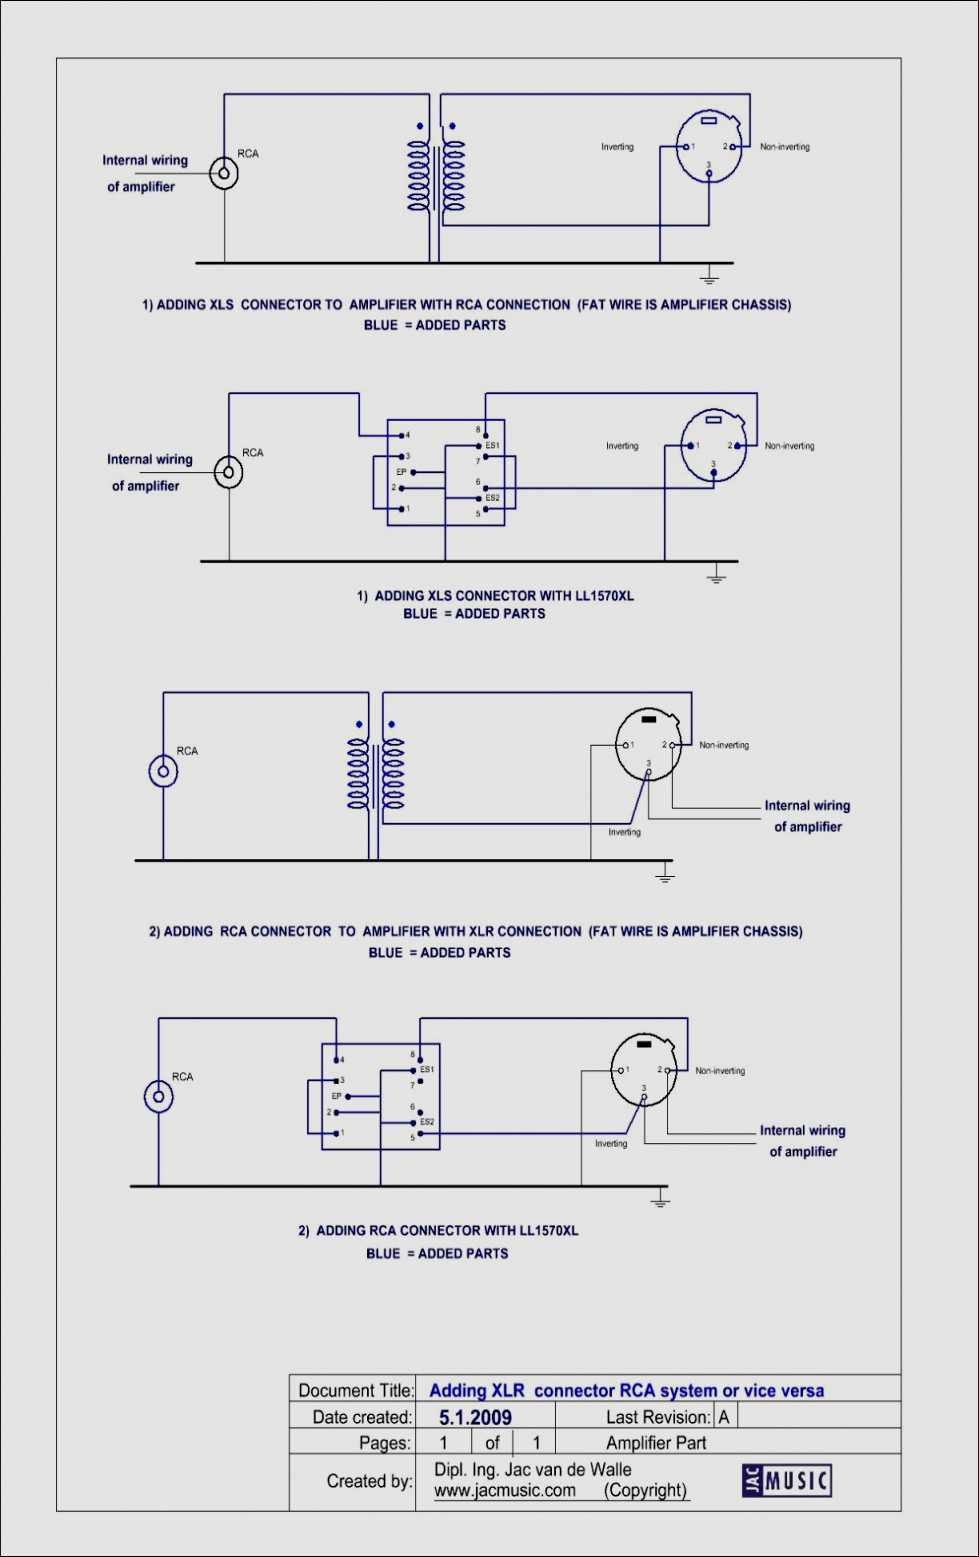 Wiring Diagram For Hdmi To Rca Plugs - Wiring Diagrams - Hdmi To Rca Wiring Diagram